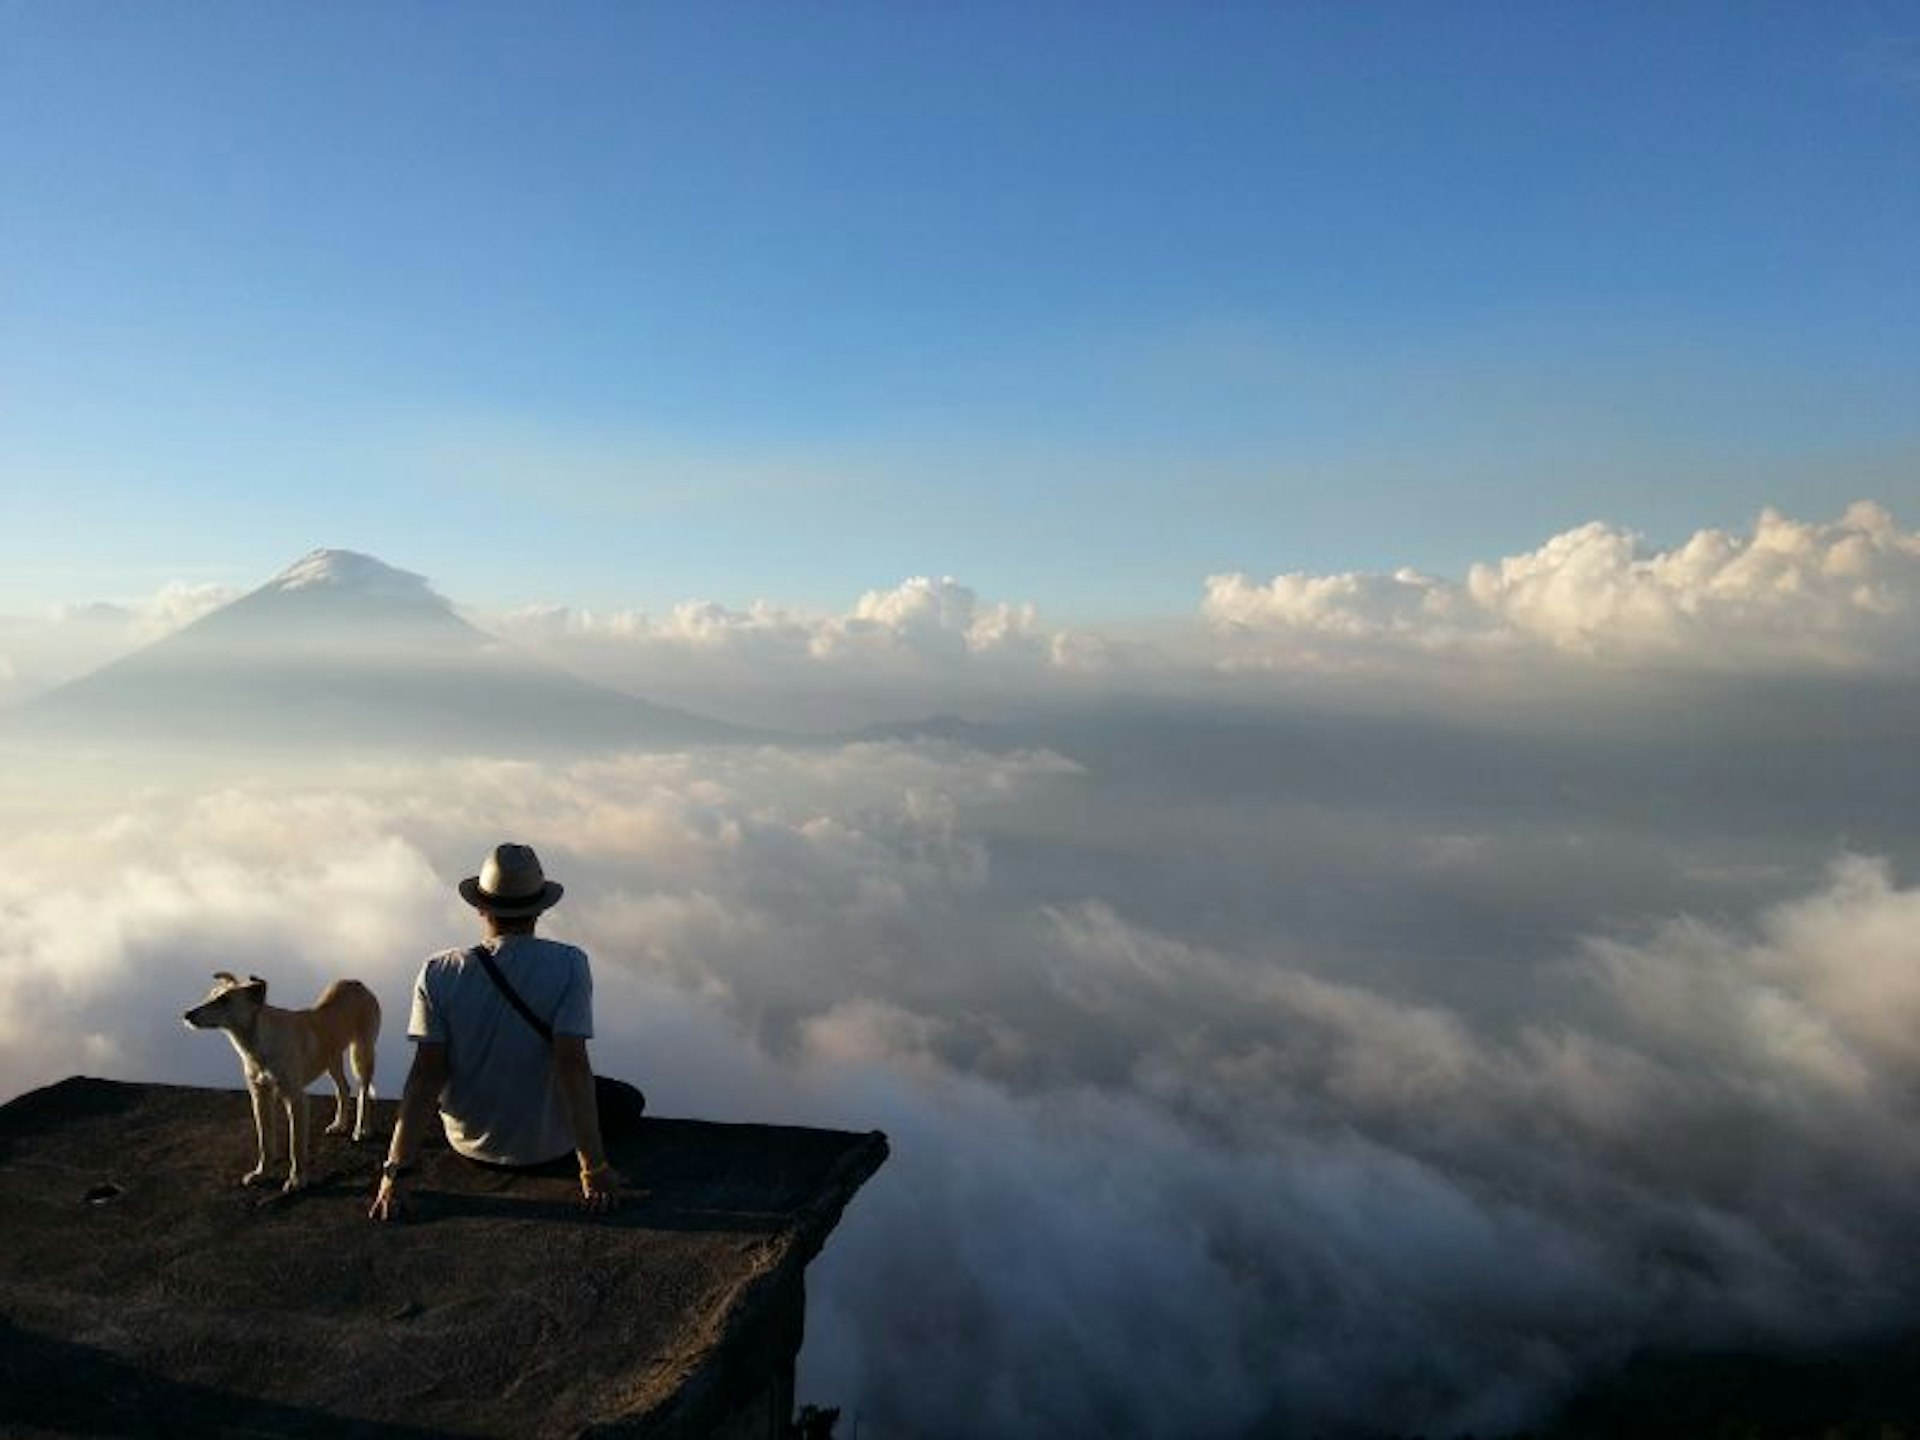 View from on top of the Observatory Bunker atop Volcan Pacaya, Guatemala